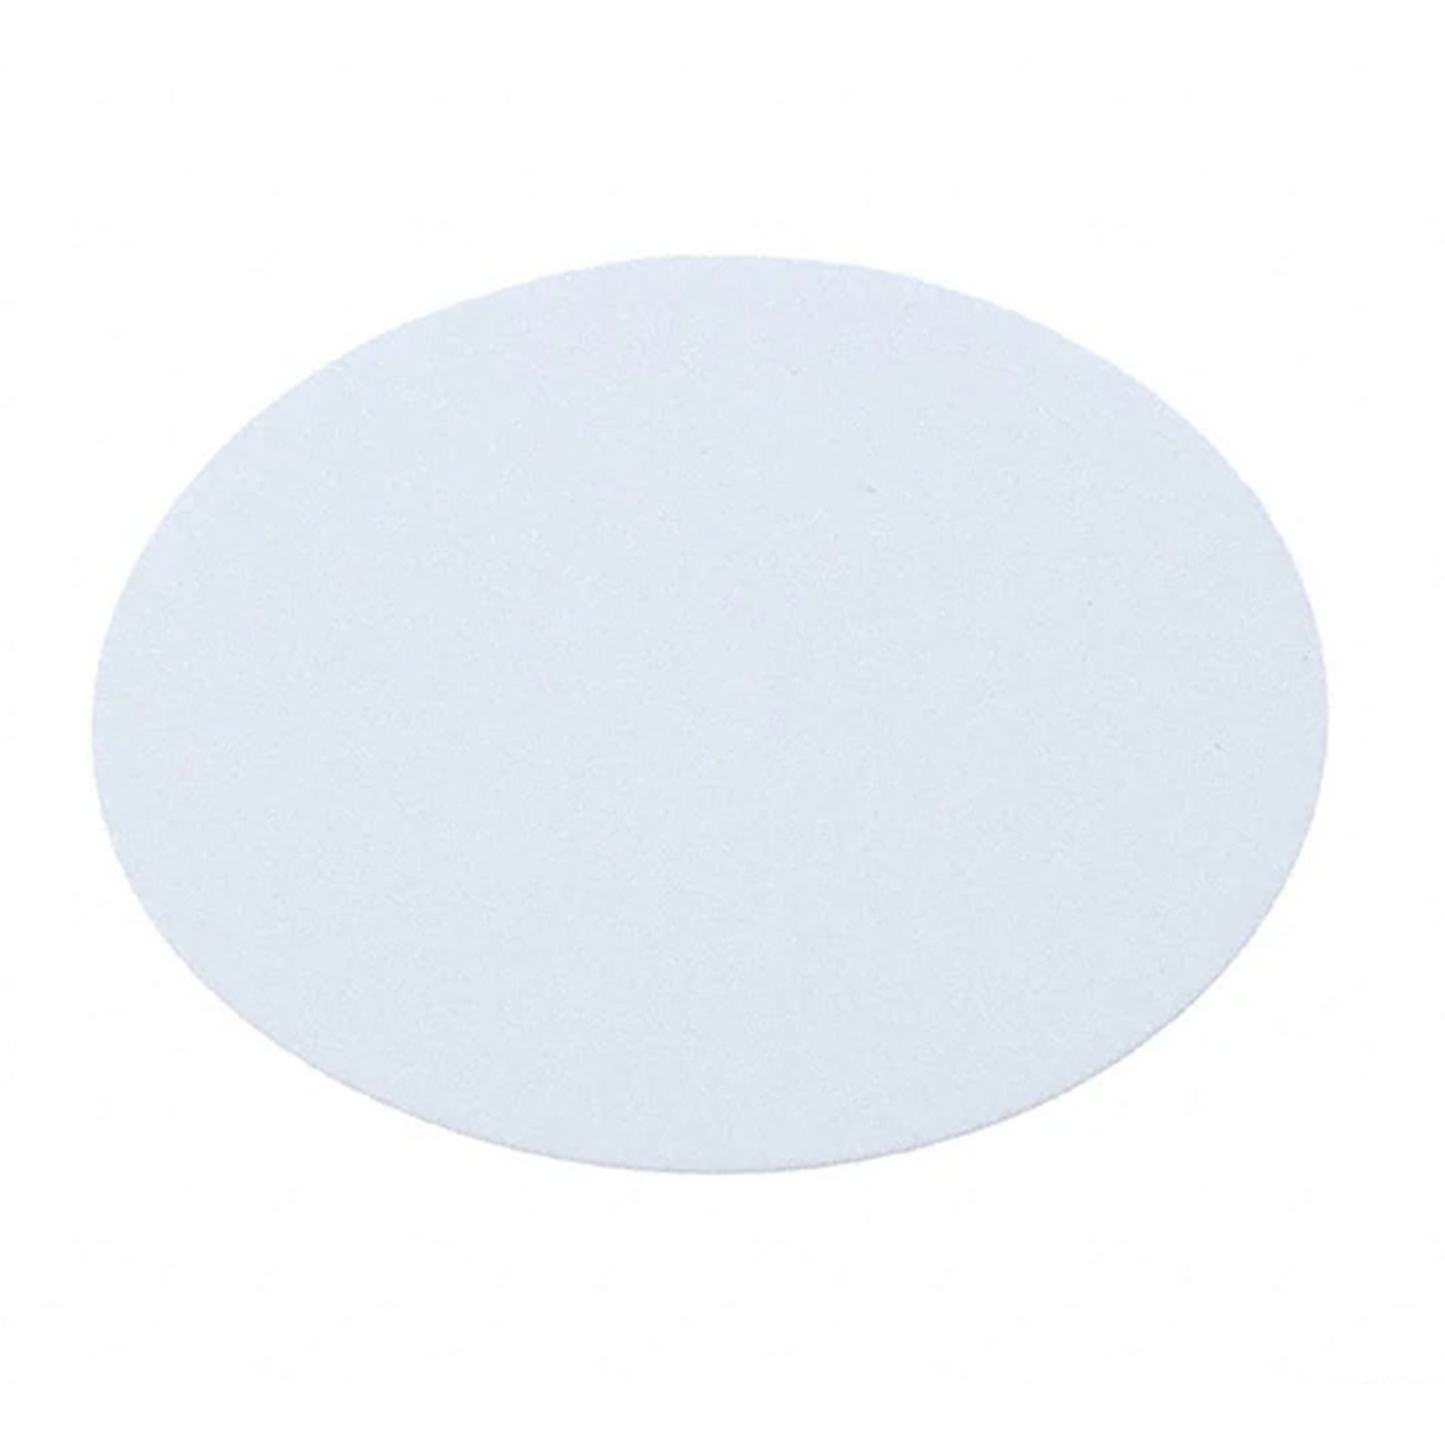 A5020 Filter (Pack of 10)